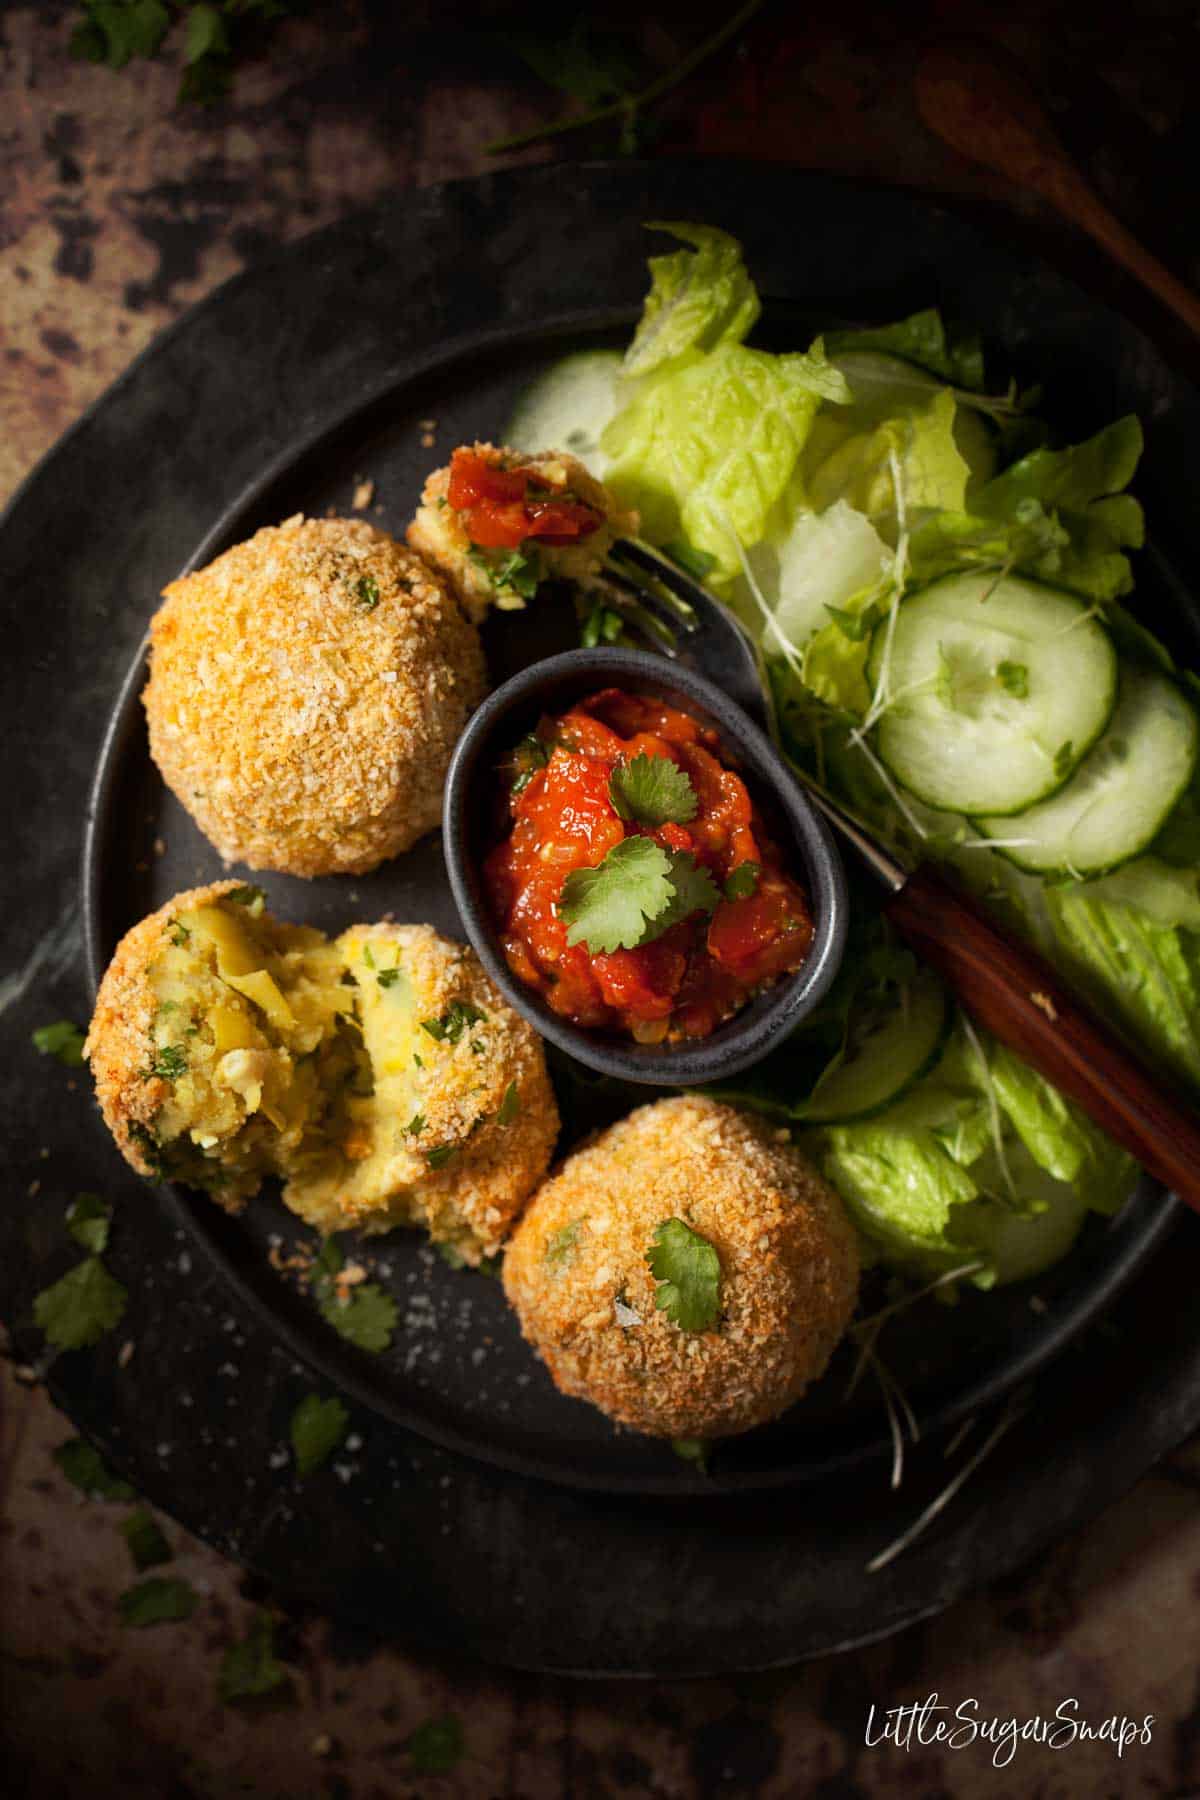 Three smoked haddock fish cakes served with spicy tomato sauce and a green salad